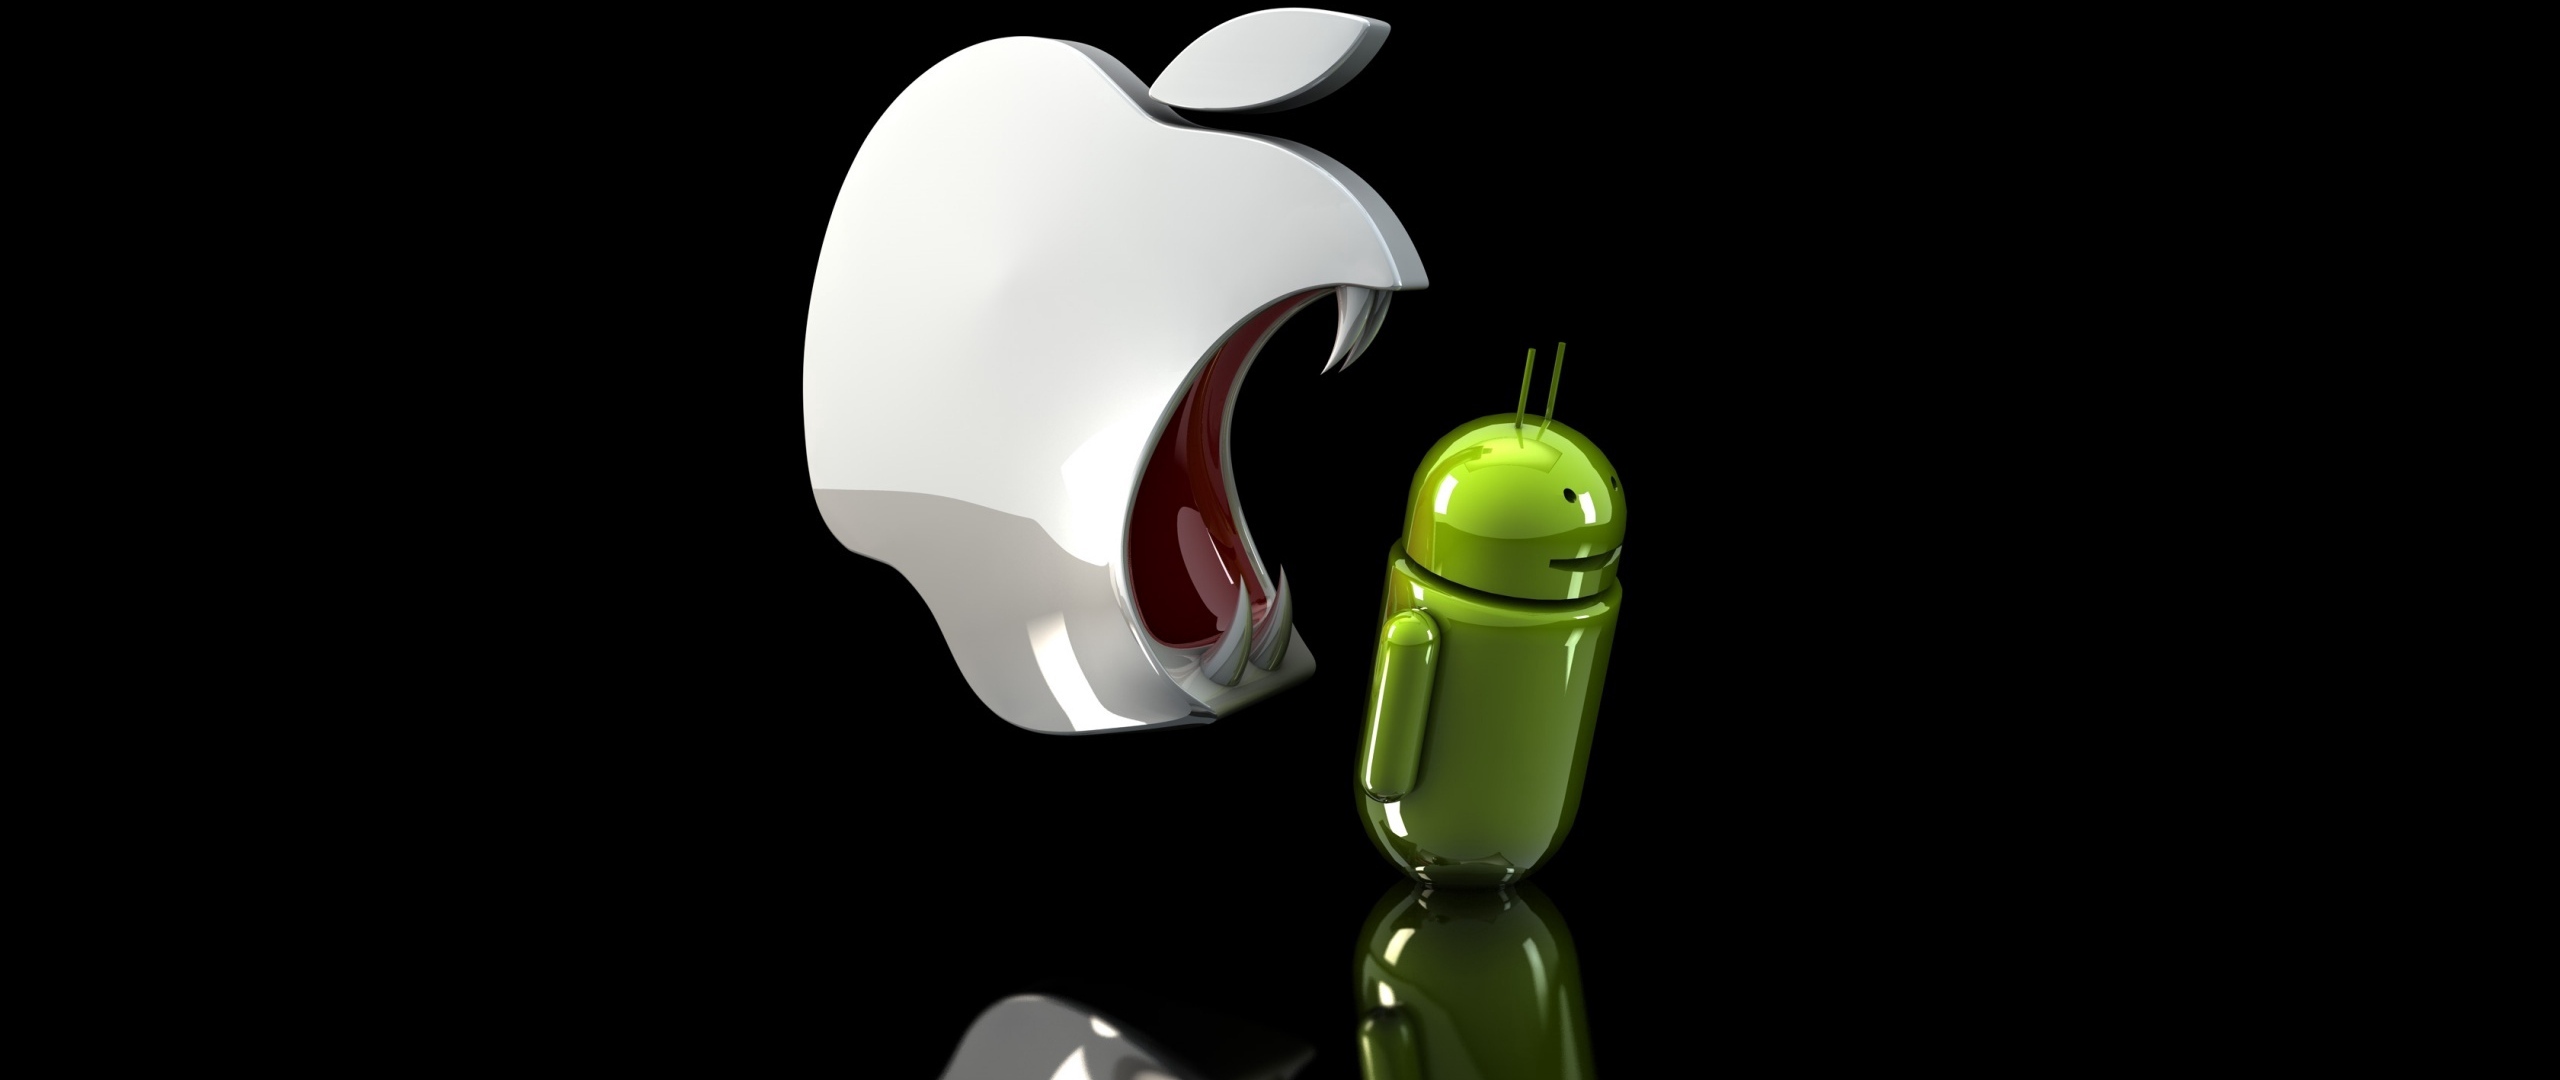 Wallpaper Apple Vs Android, Android, Competition - Apple Android - HD Wallpaper 